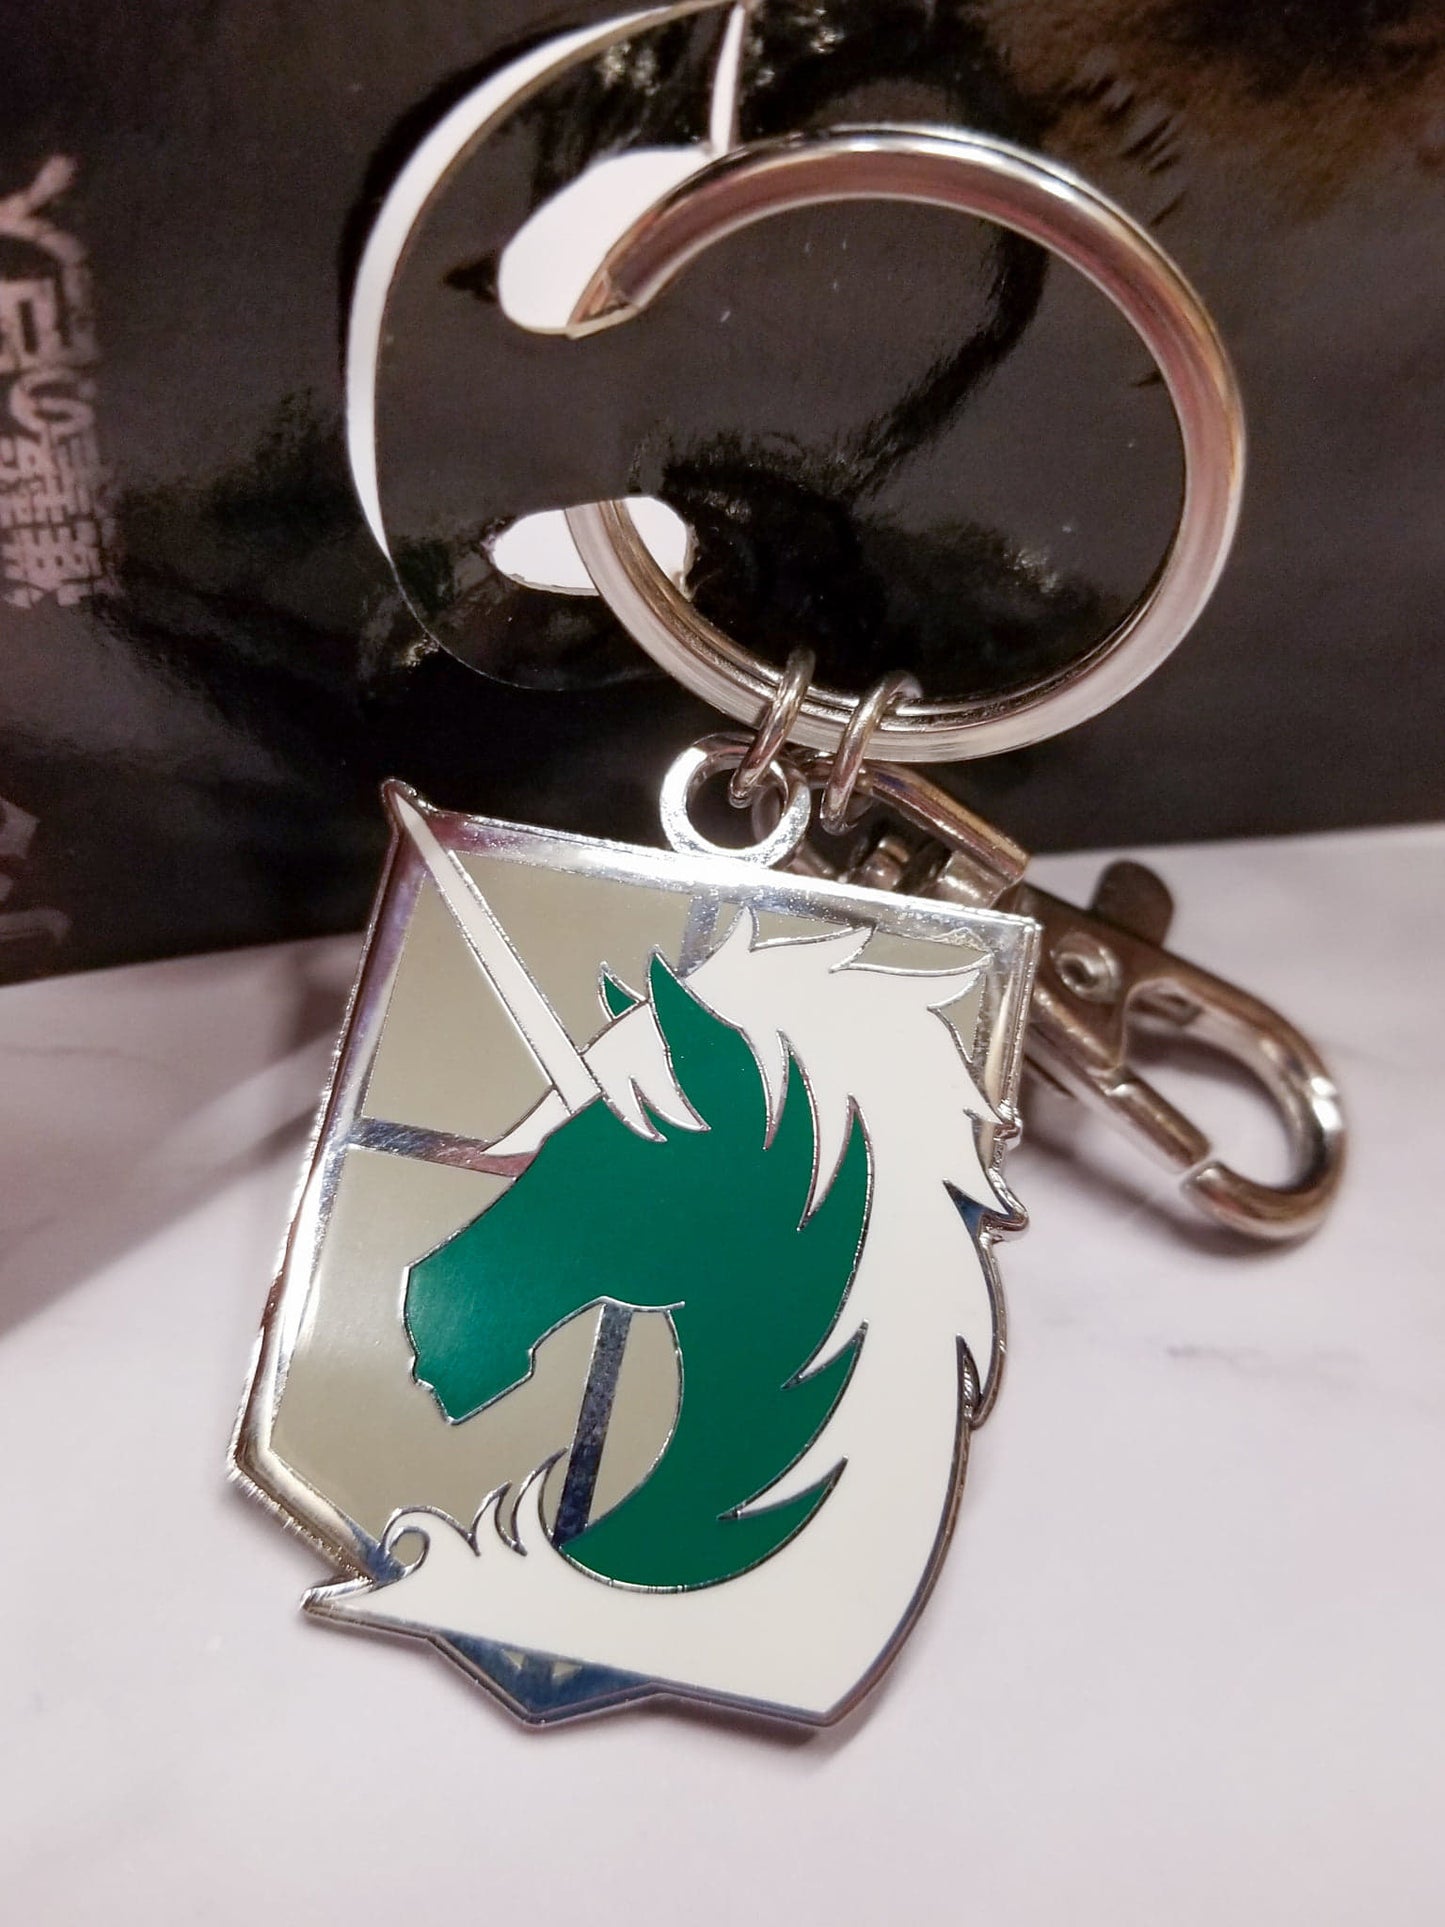 An enameled metal keychain with clip and ring, depicting the Military Police Brigade emblem from Attack on Titan.  The metal emblem is approximately 1 inch wide by 1.5 inches tall.